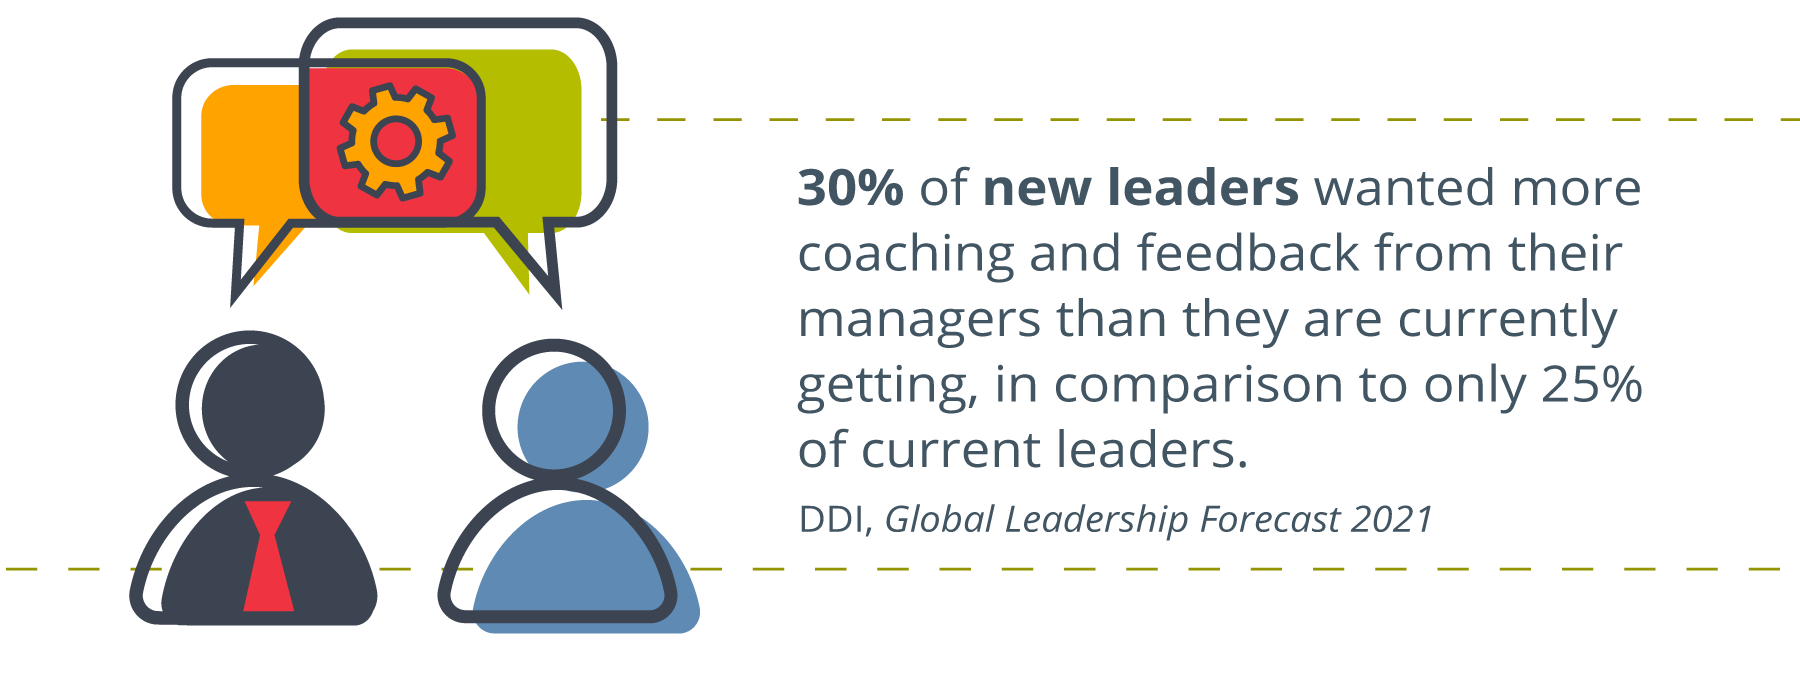 two people icons, one with a tie, each with thought bubbles coming from their heads, one thought bubble contains a gear, written to the right of it: 30% of new leaders wanted more coaching and feedback from their managers than they are currently getting, in comparison to only 25% of current leaders. source: 2021 DDI Global Leadership Forecast research